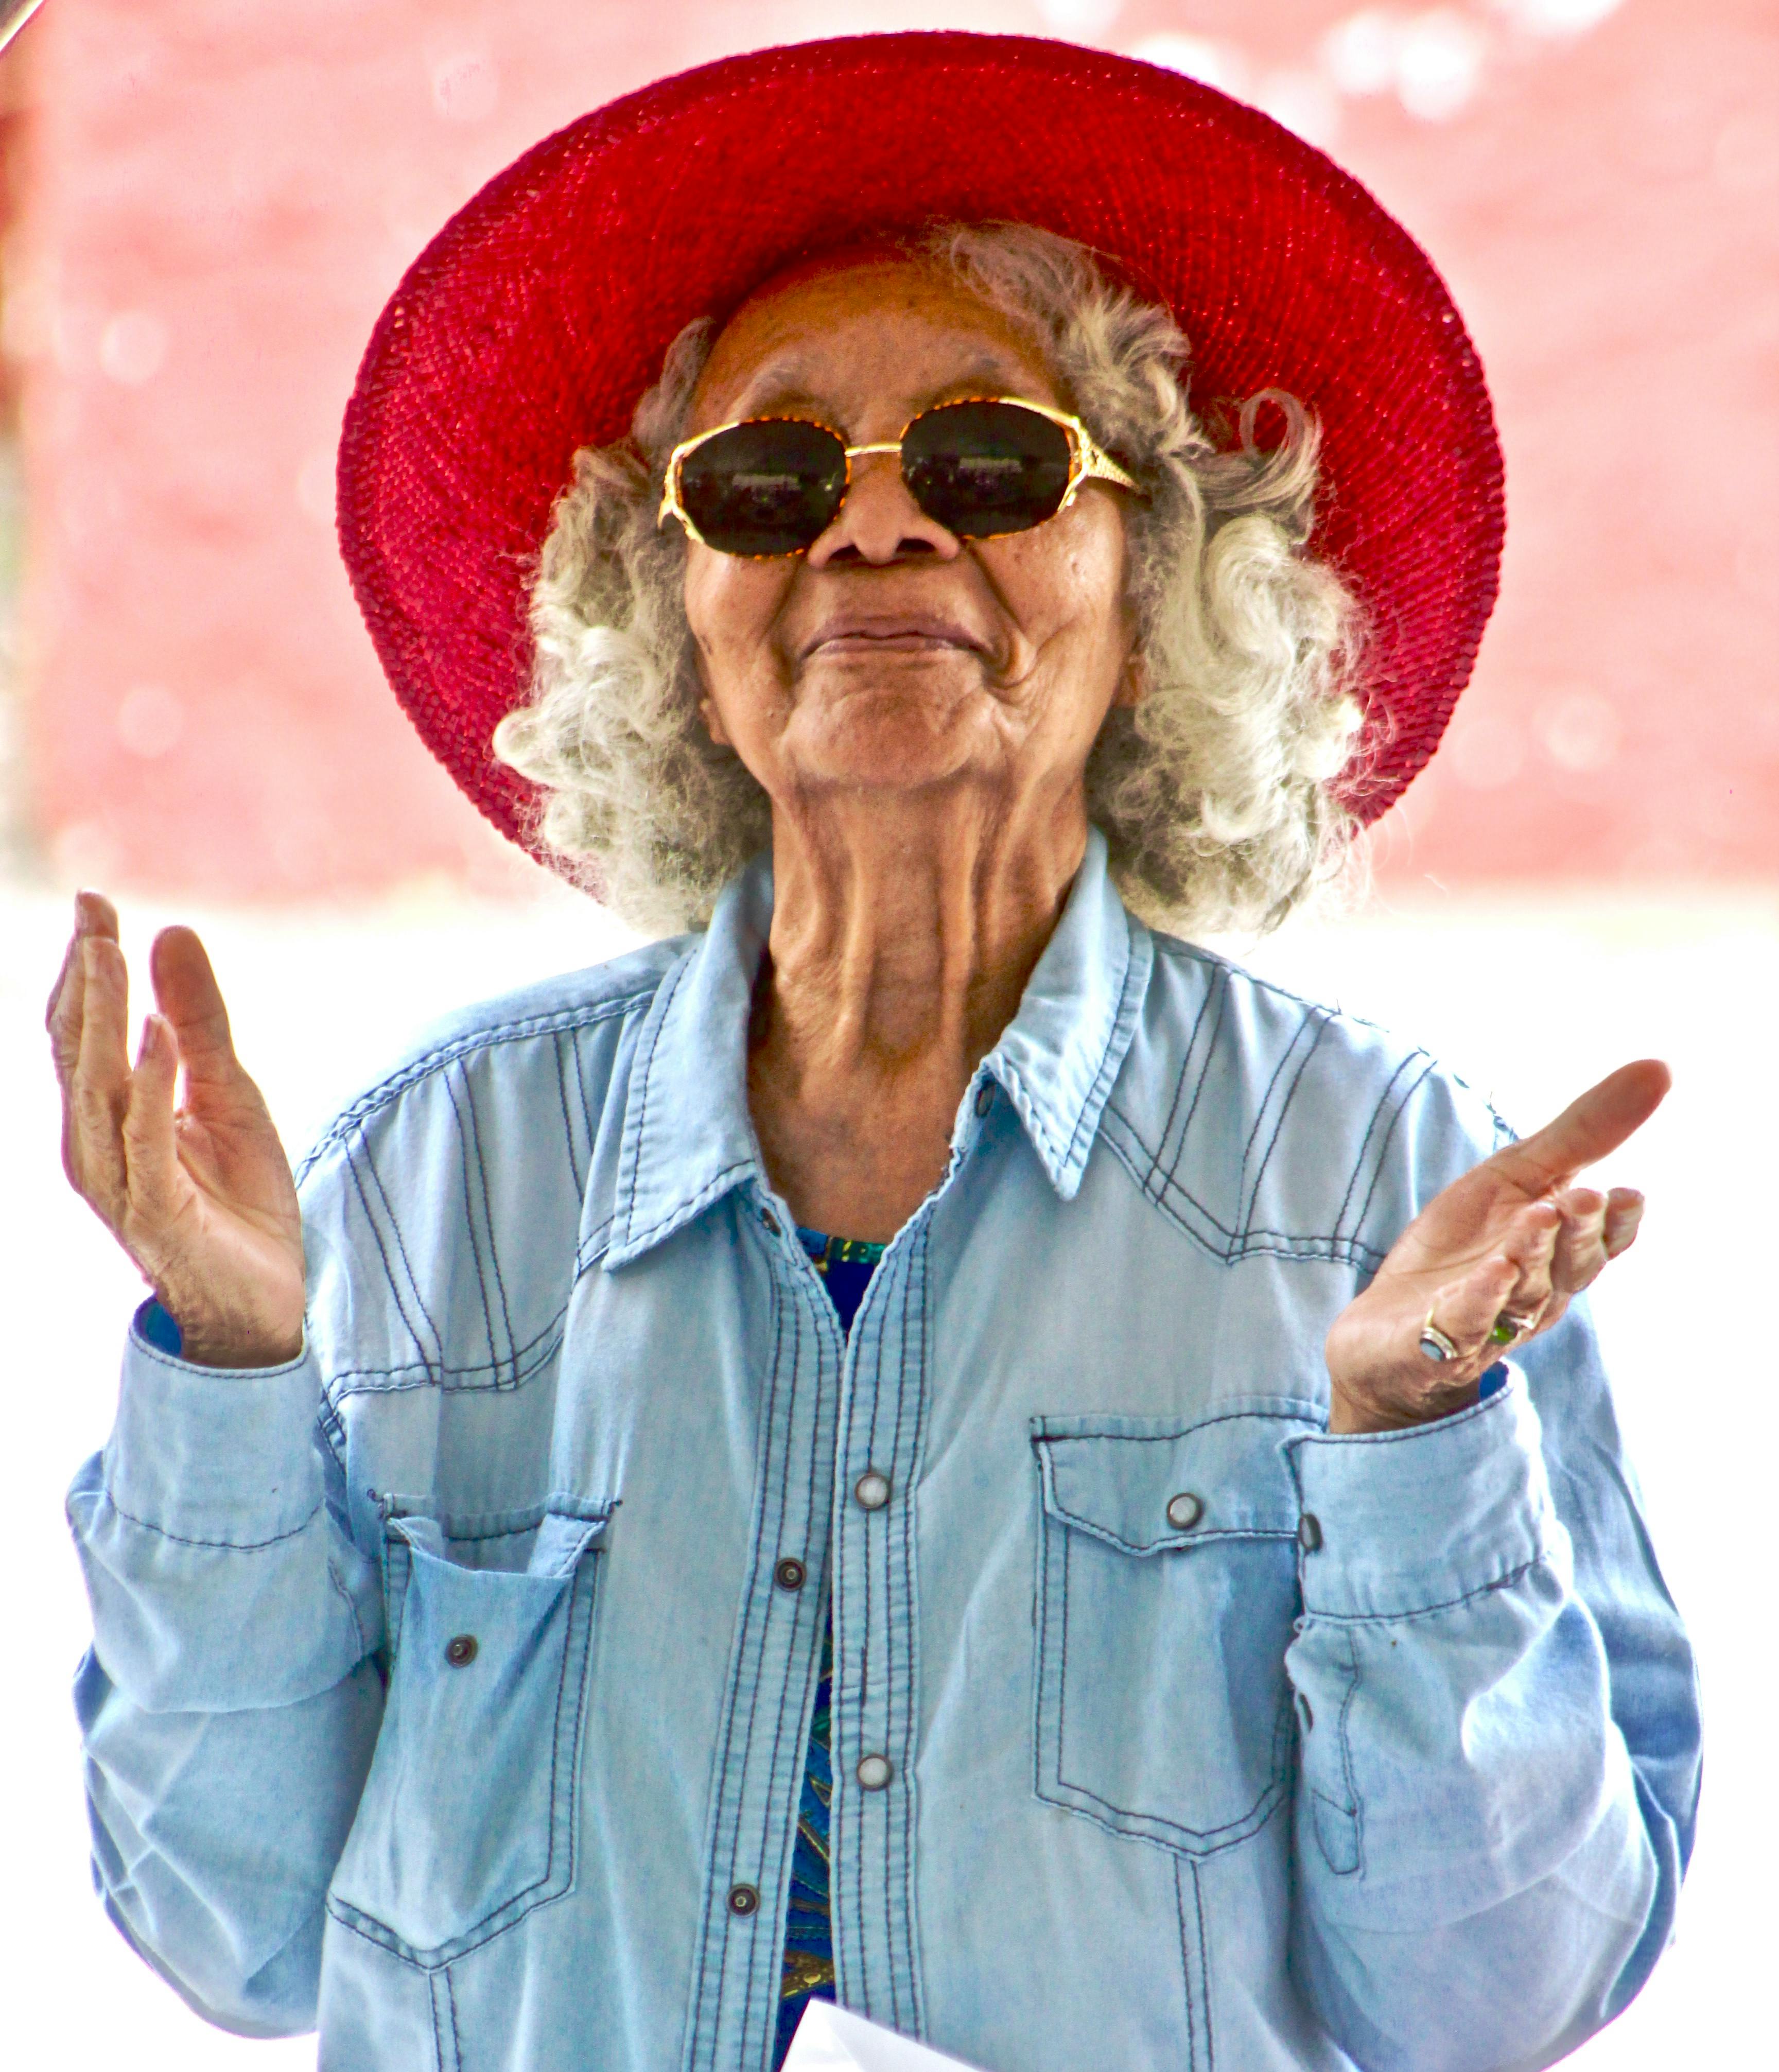 An old woman wearing a red hat and sunglasses. | Photo: Pexels